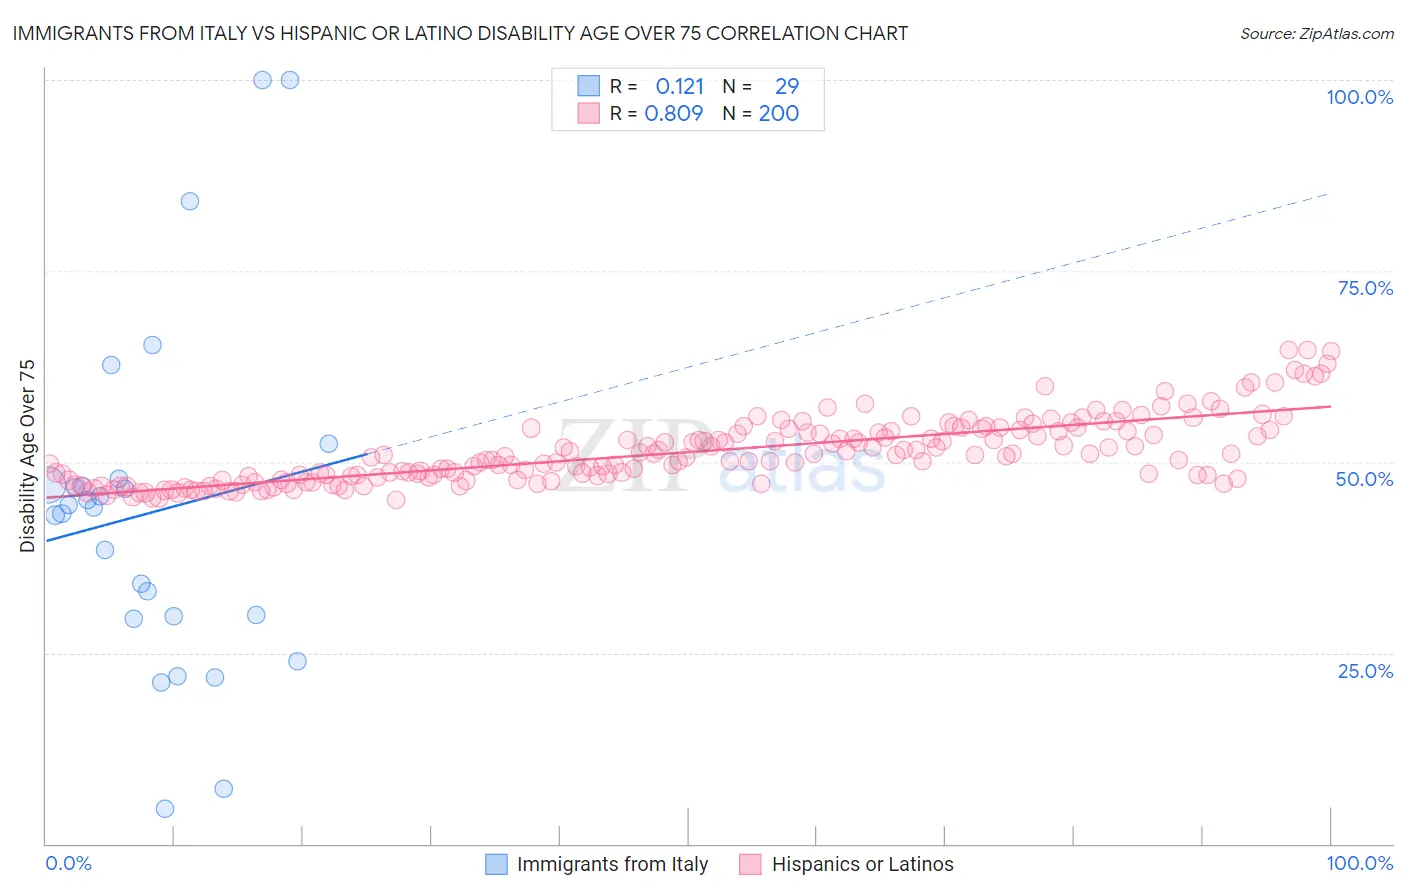 Immigrants from Italy vs Hispanic or Latino Disability Age Over 75